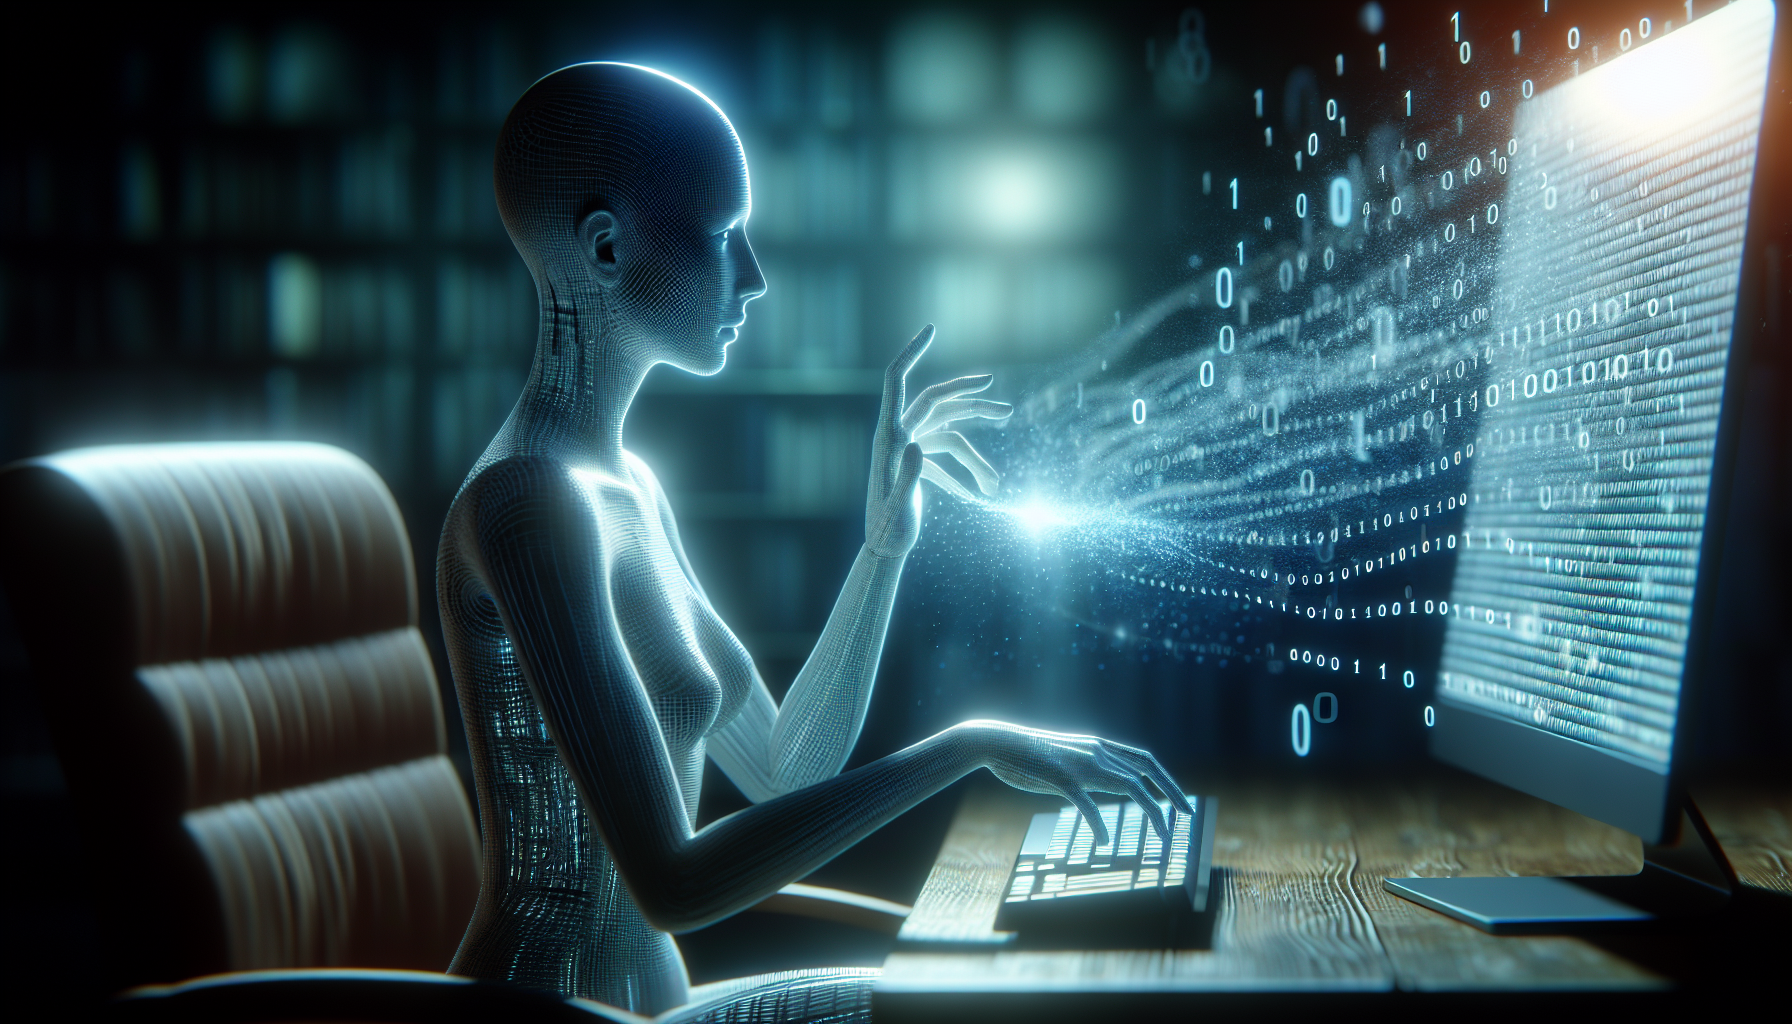 Illustration of a human speaking to a computer